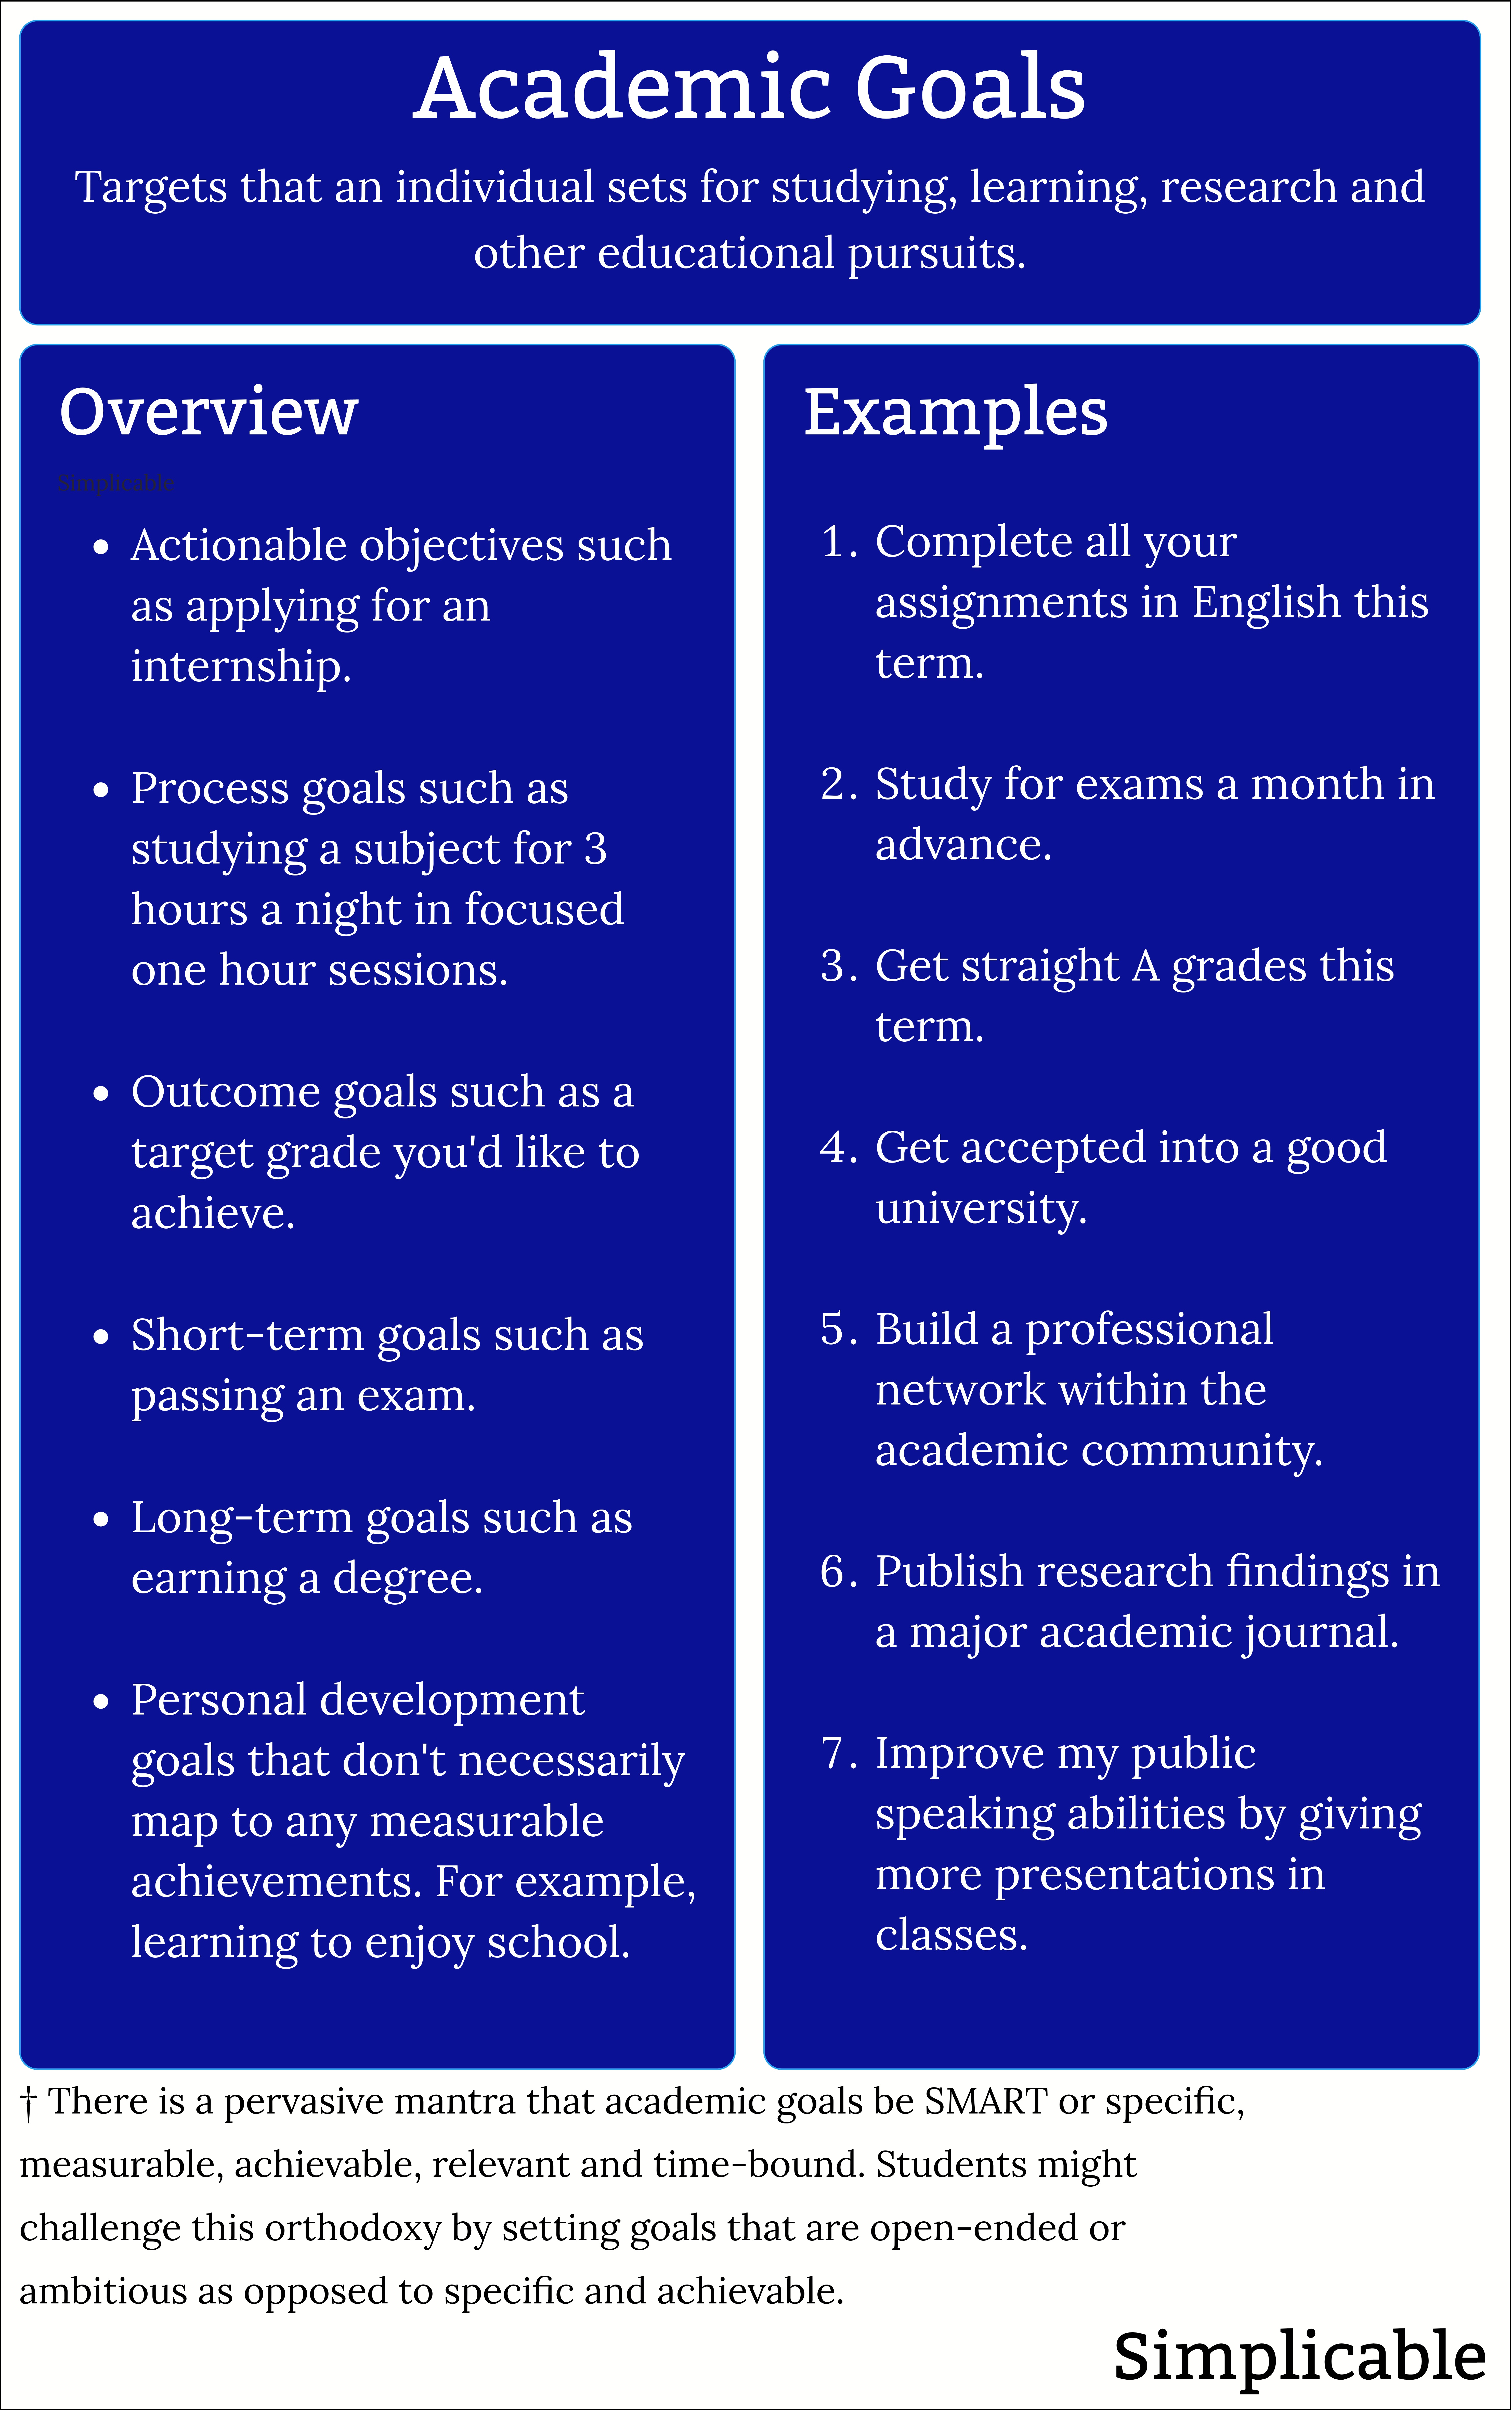 academic goals overview and examples